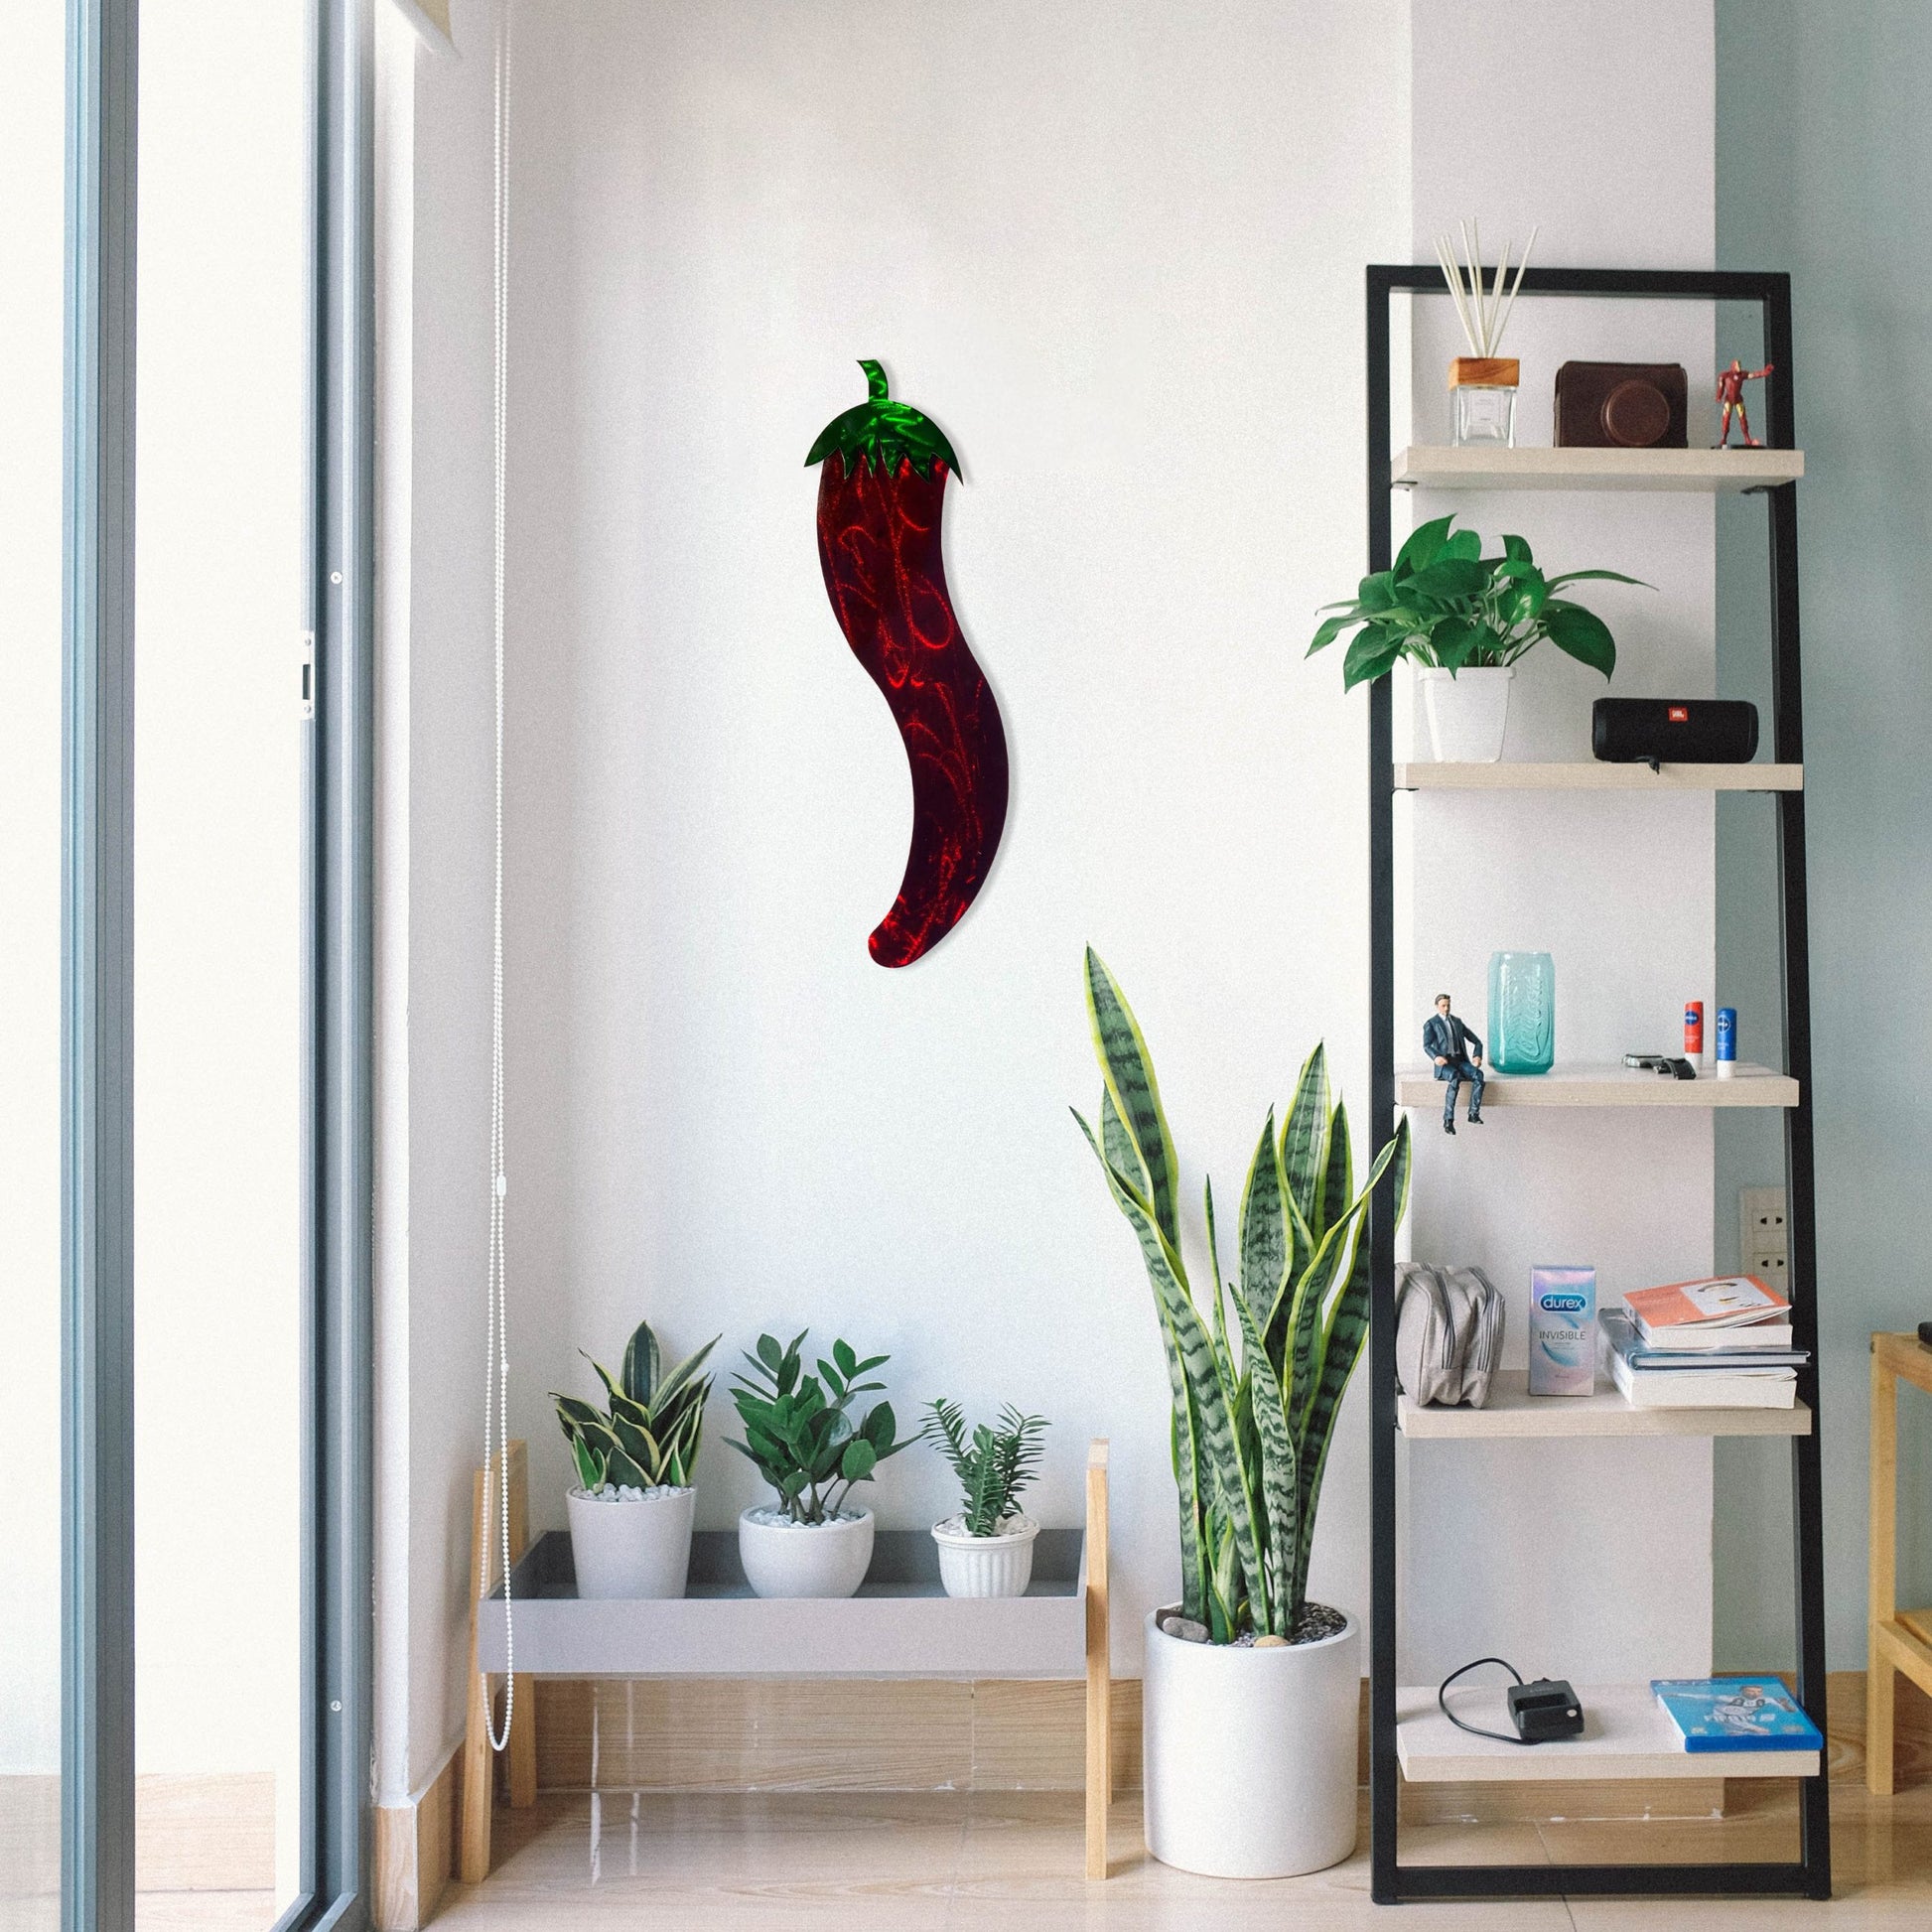 chili-pepper-on-wall-scaled